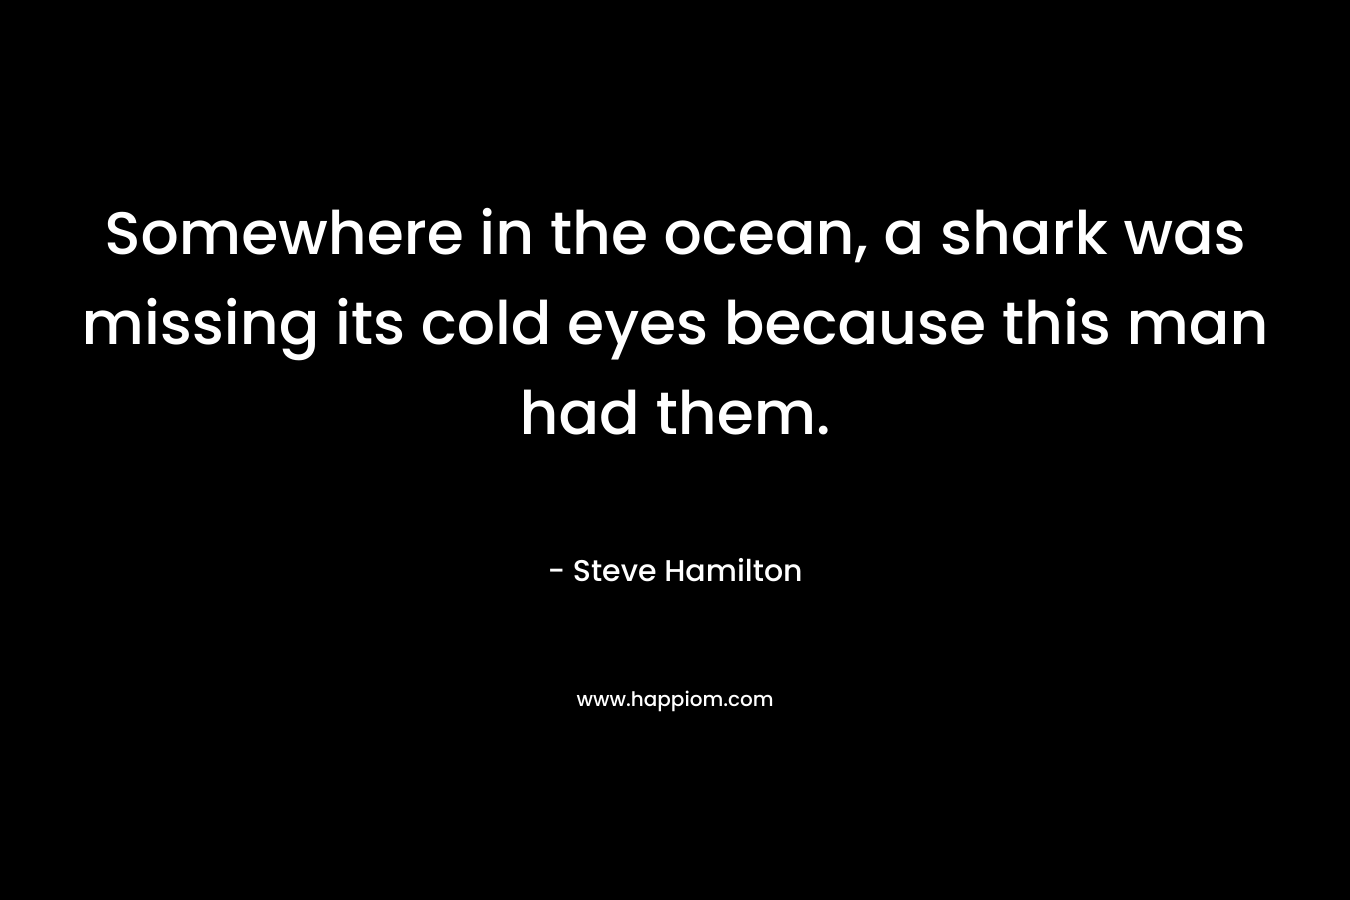 Somewhere in the ocean, a shark was missing its cold eyes because this man had them. – Steve Hamilton